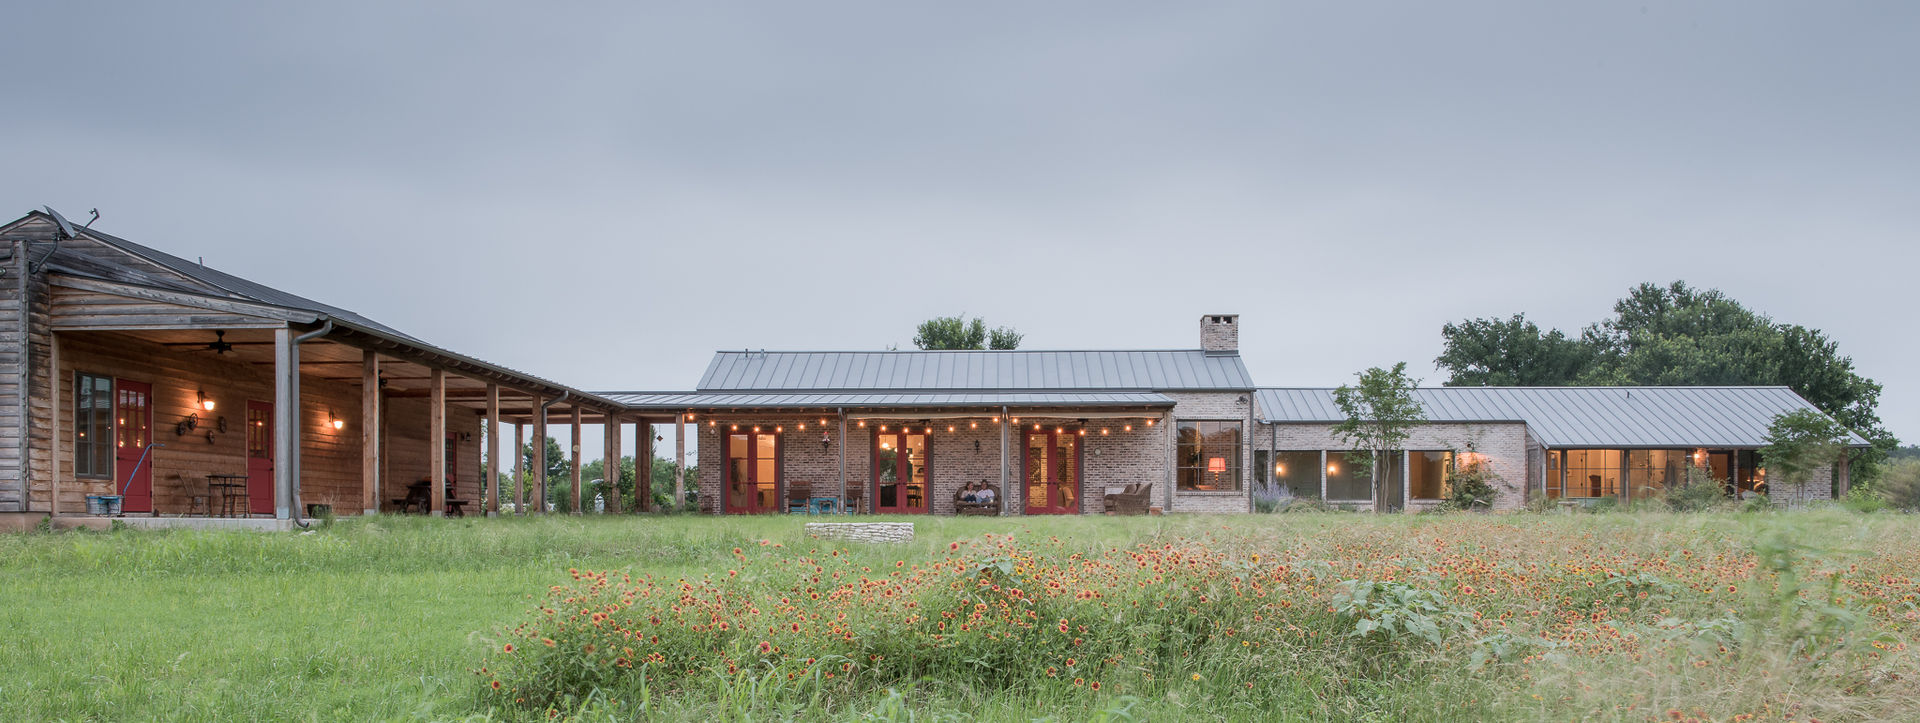 River Ranch Residence Hugh Jefferson Randolph Architects Country style house